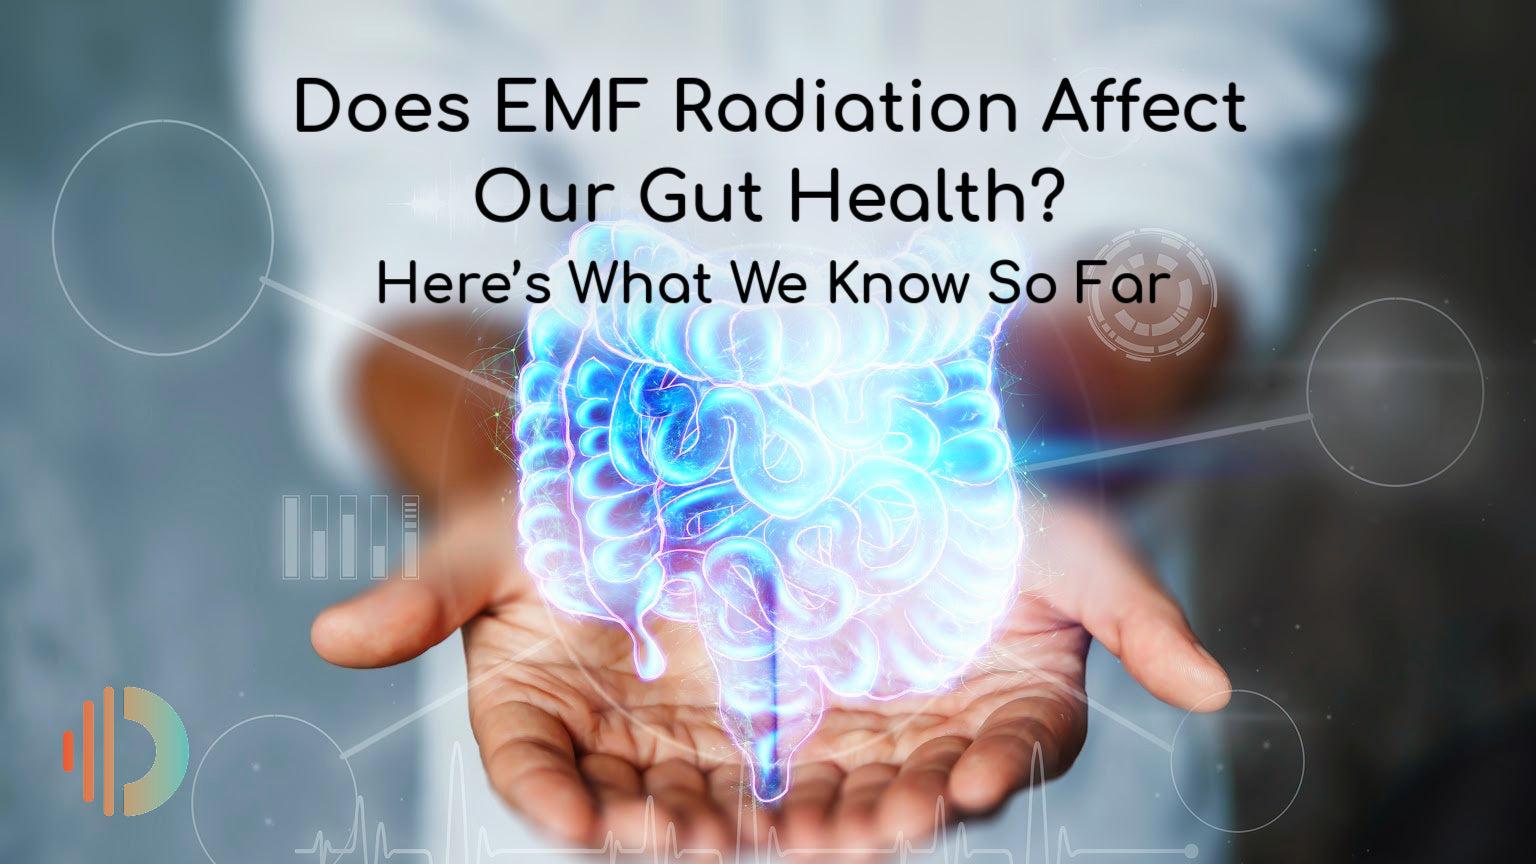 Learn About EMF Radiation's Effect On Our Antibiotic Resistance From This Report